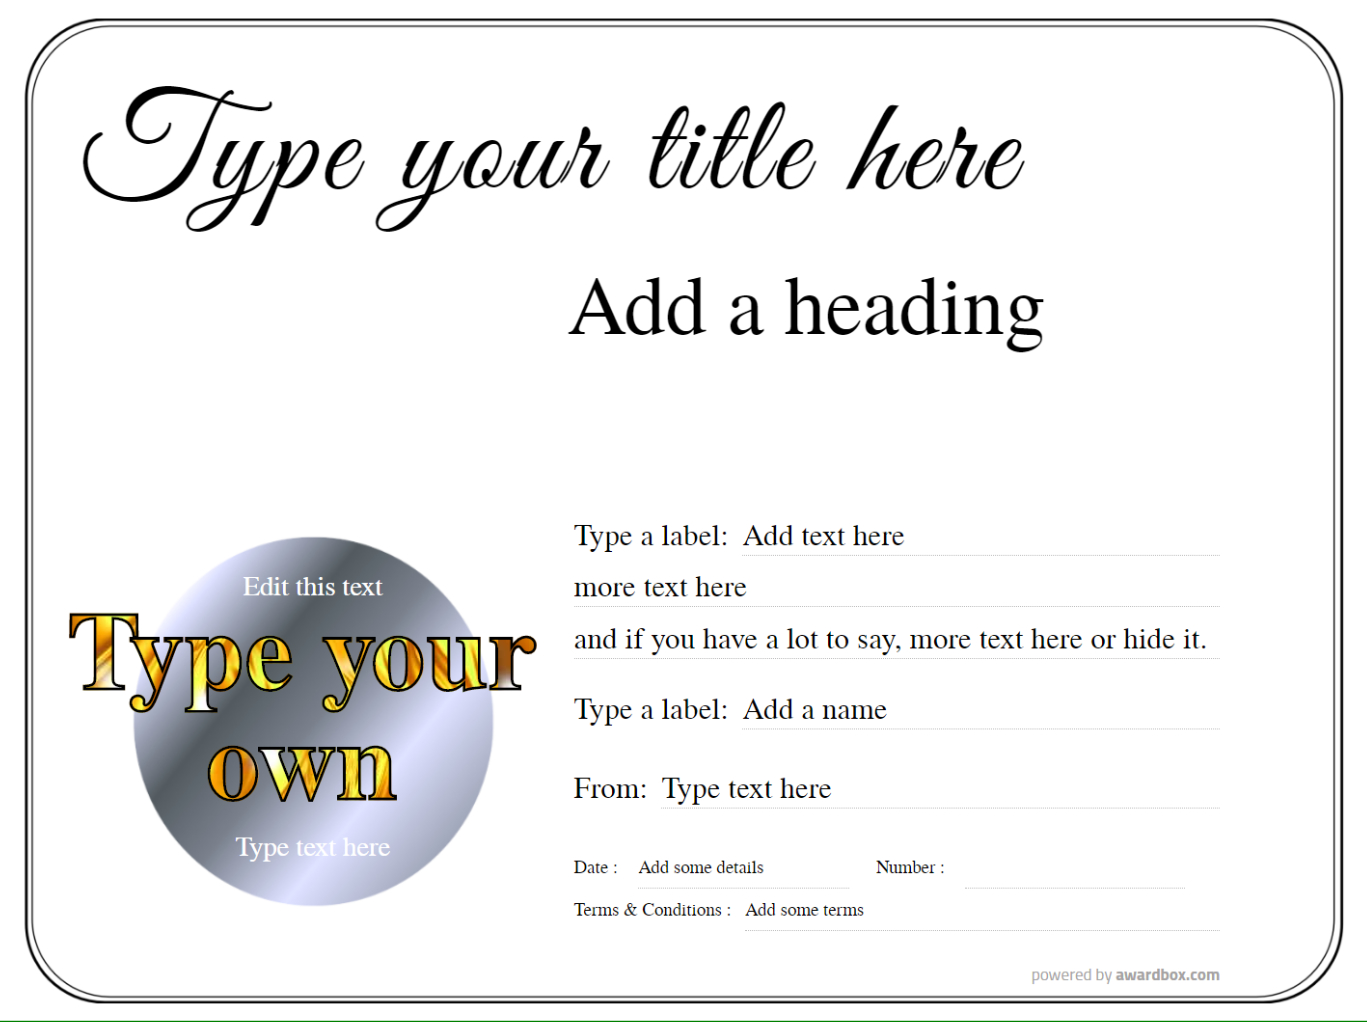 Free Gift Certificate templates and ideas - fully editable For Free Printable Funny Certificate Templates